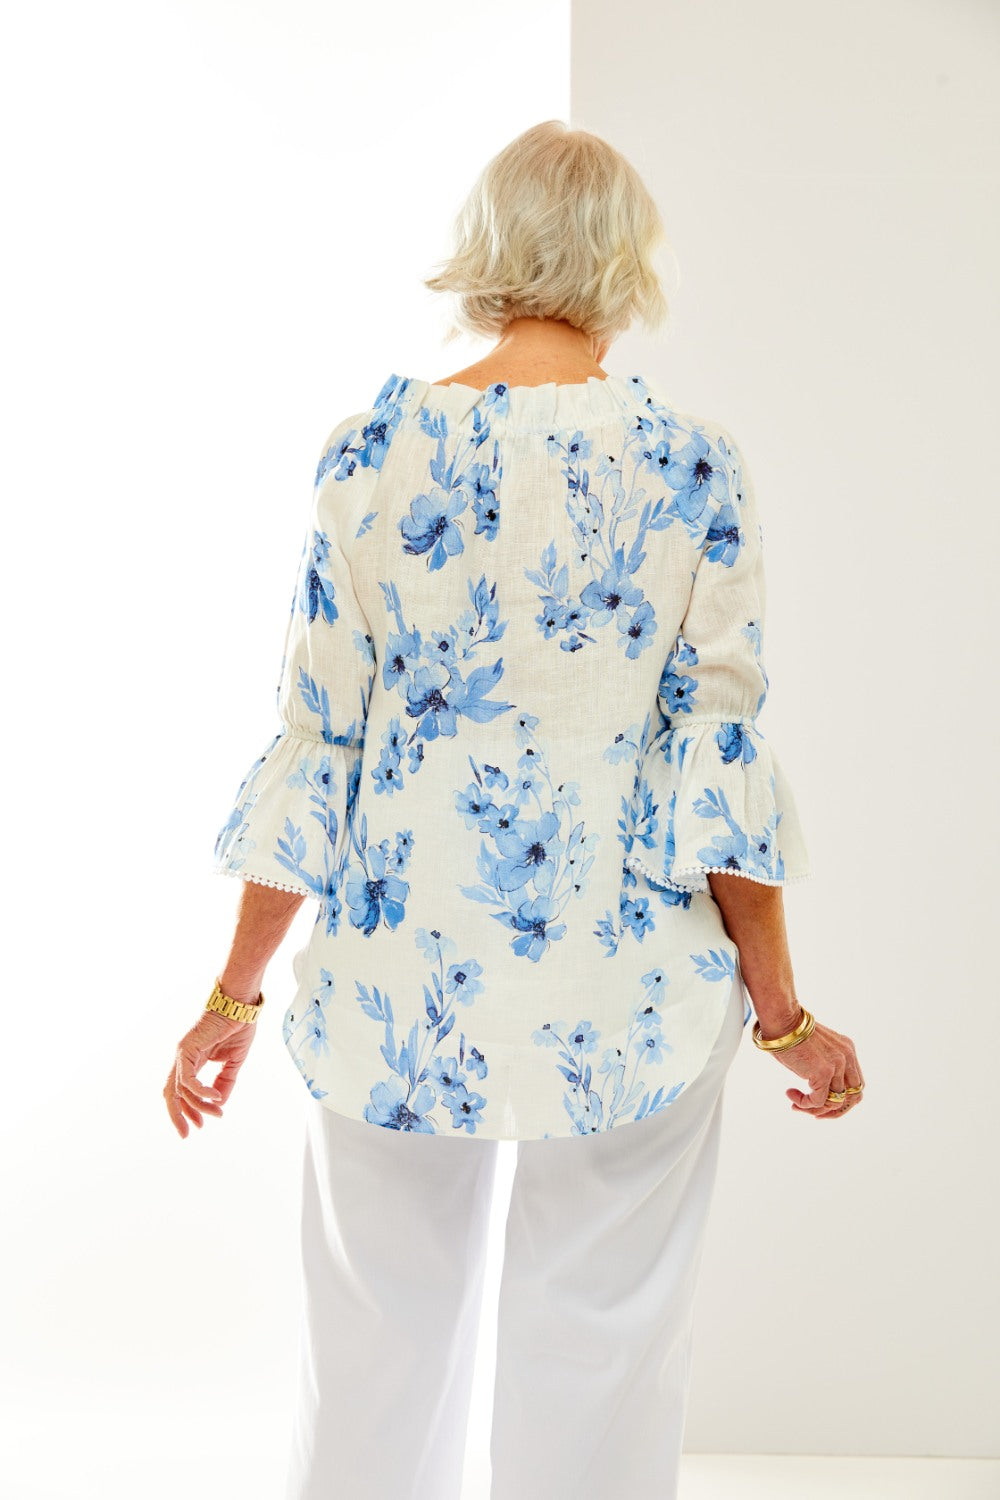 Woman in blue floral blouse